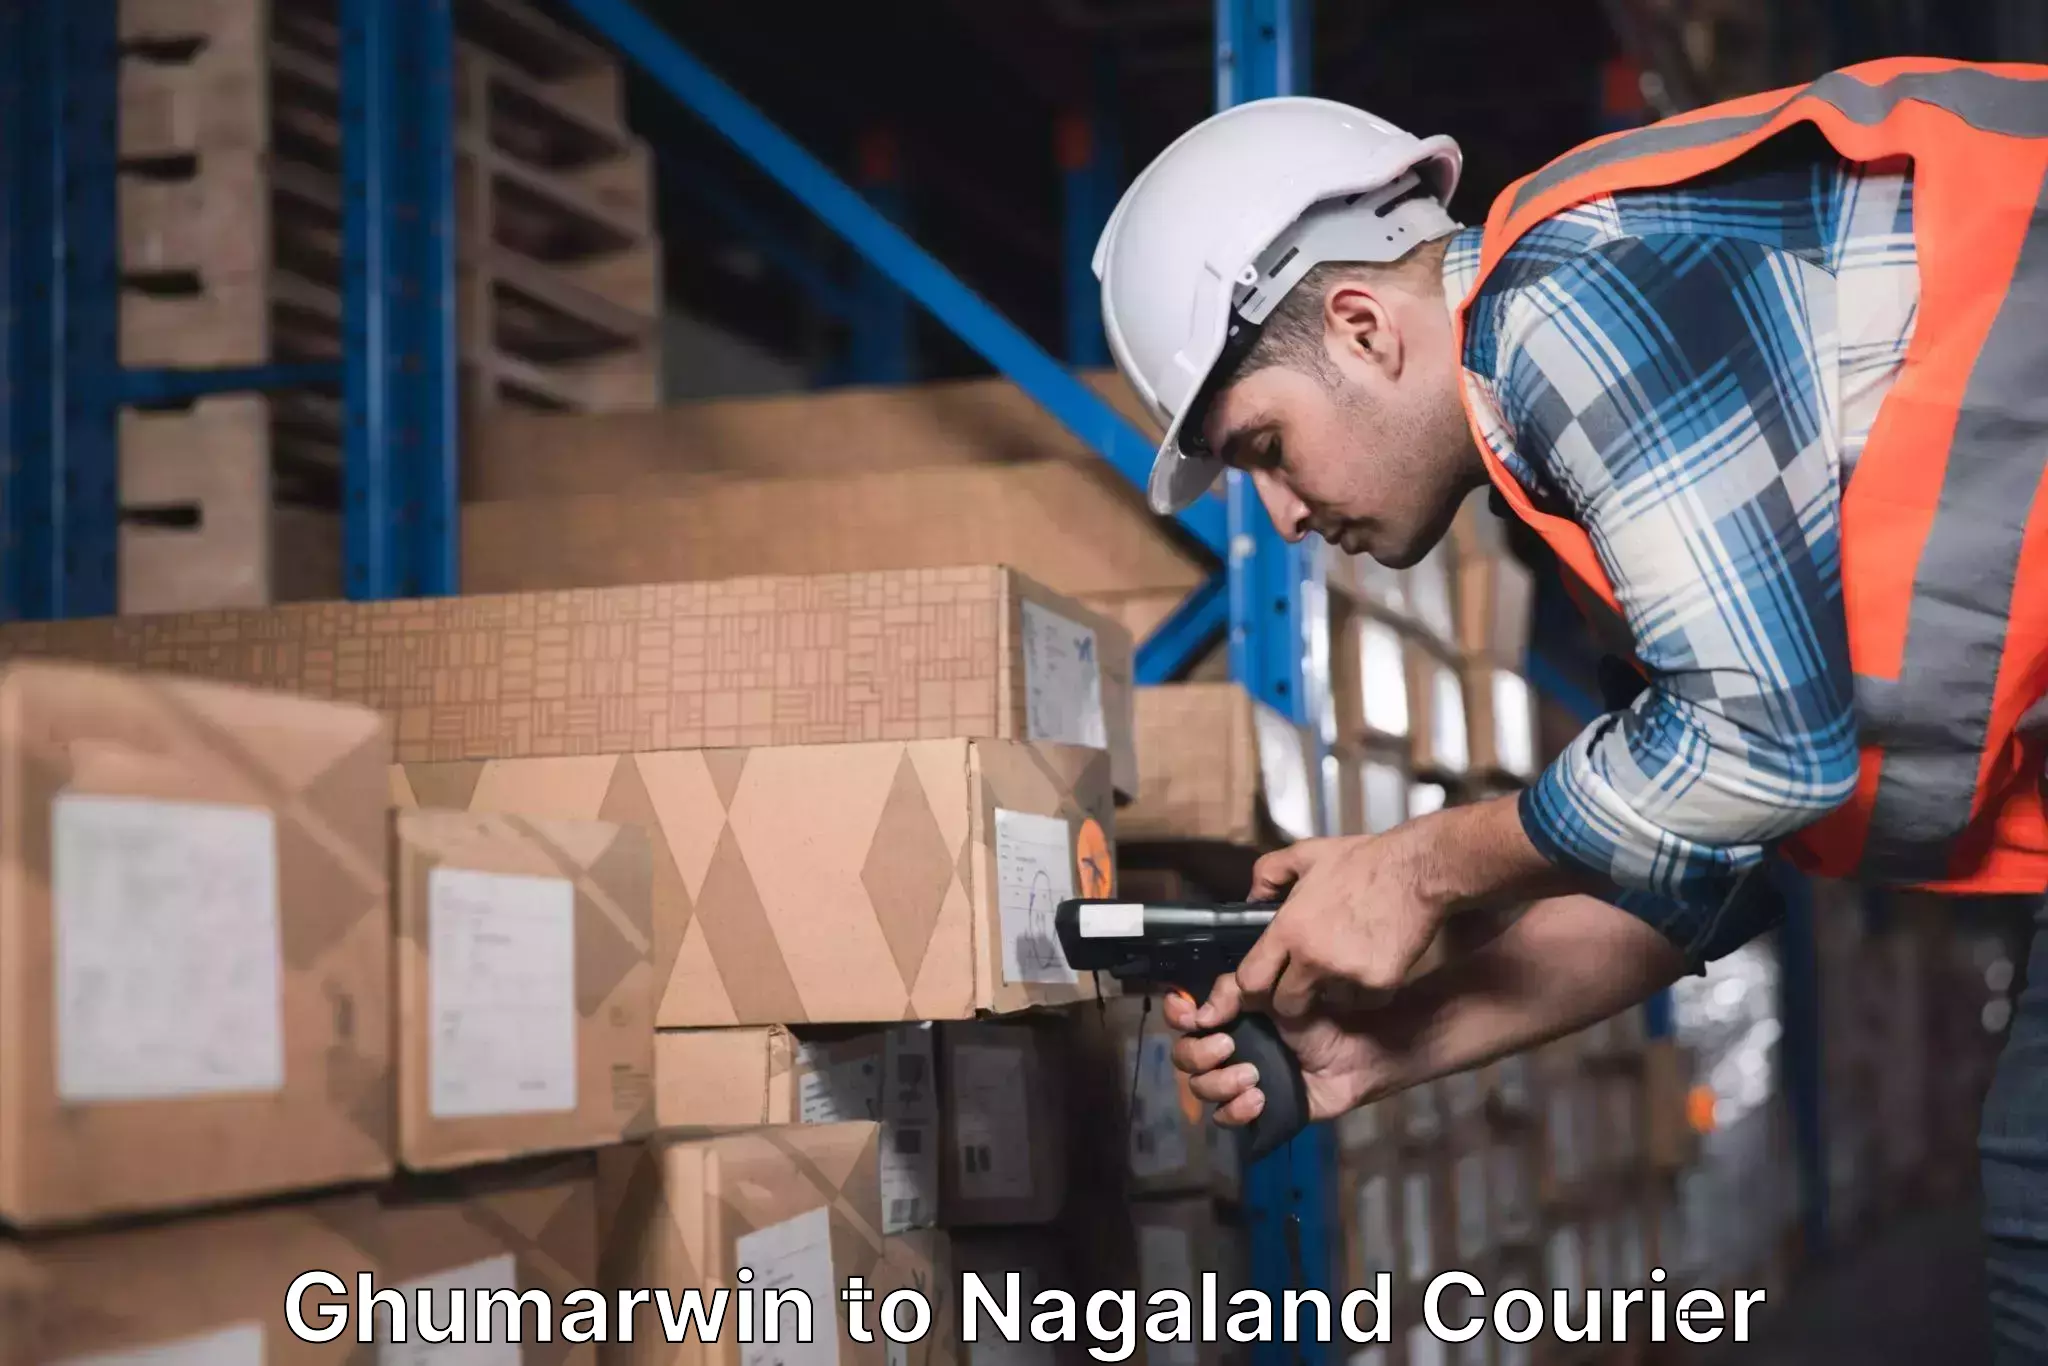 Subscription-based courier Ghumarwin to Nagaland